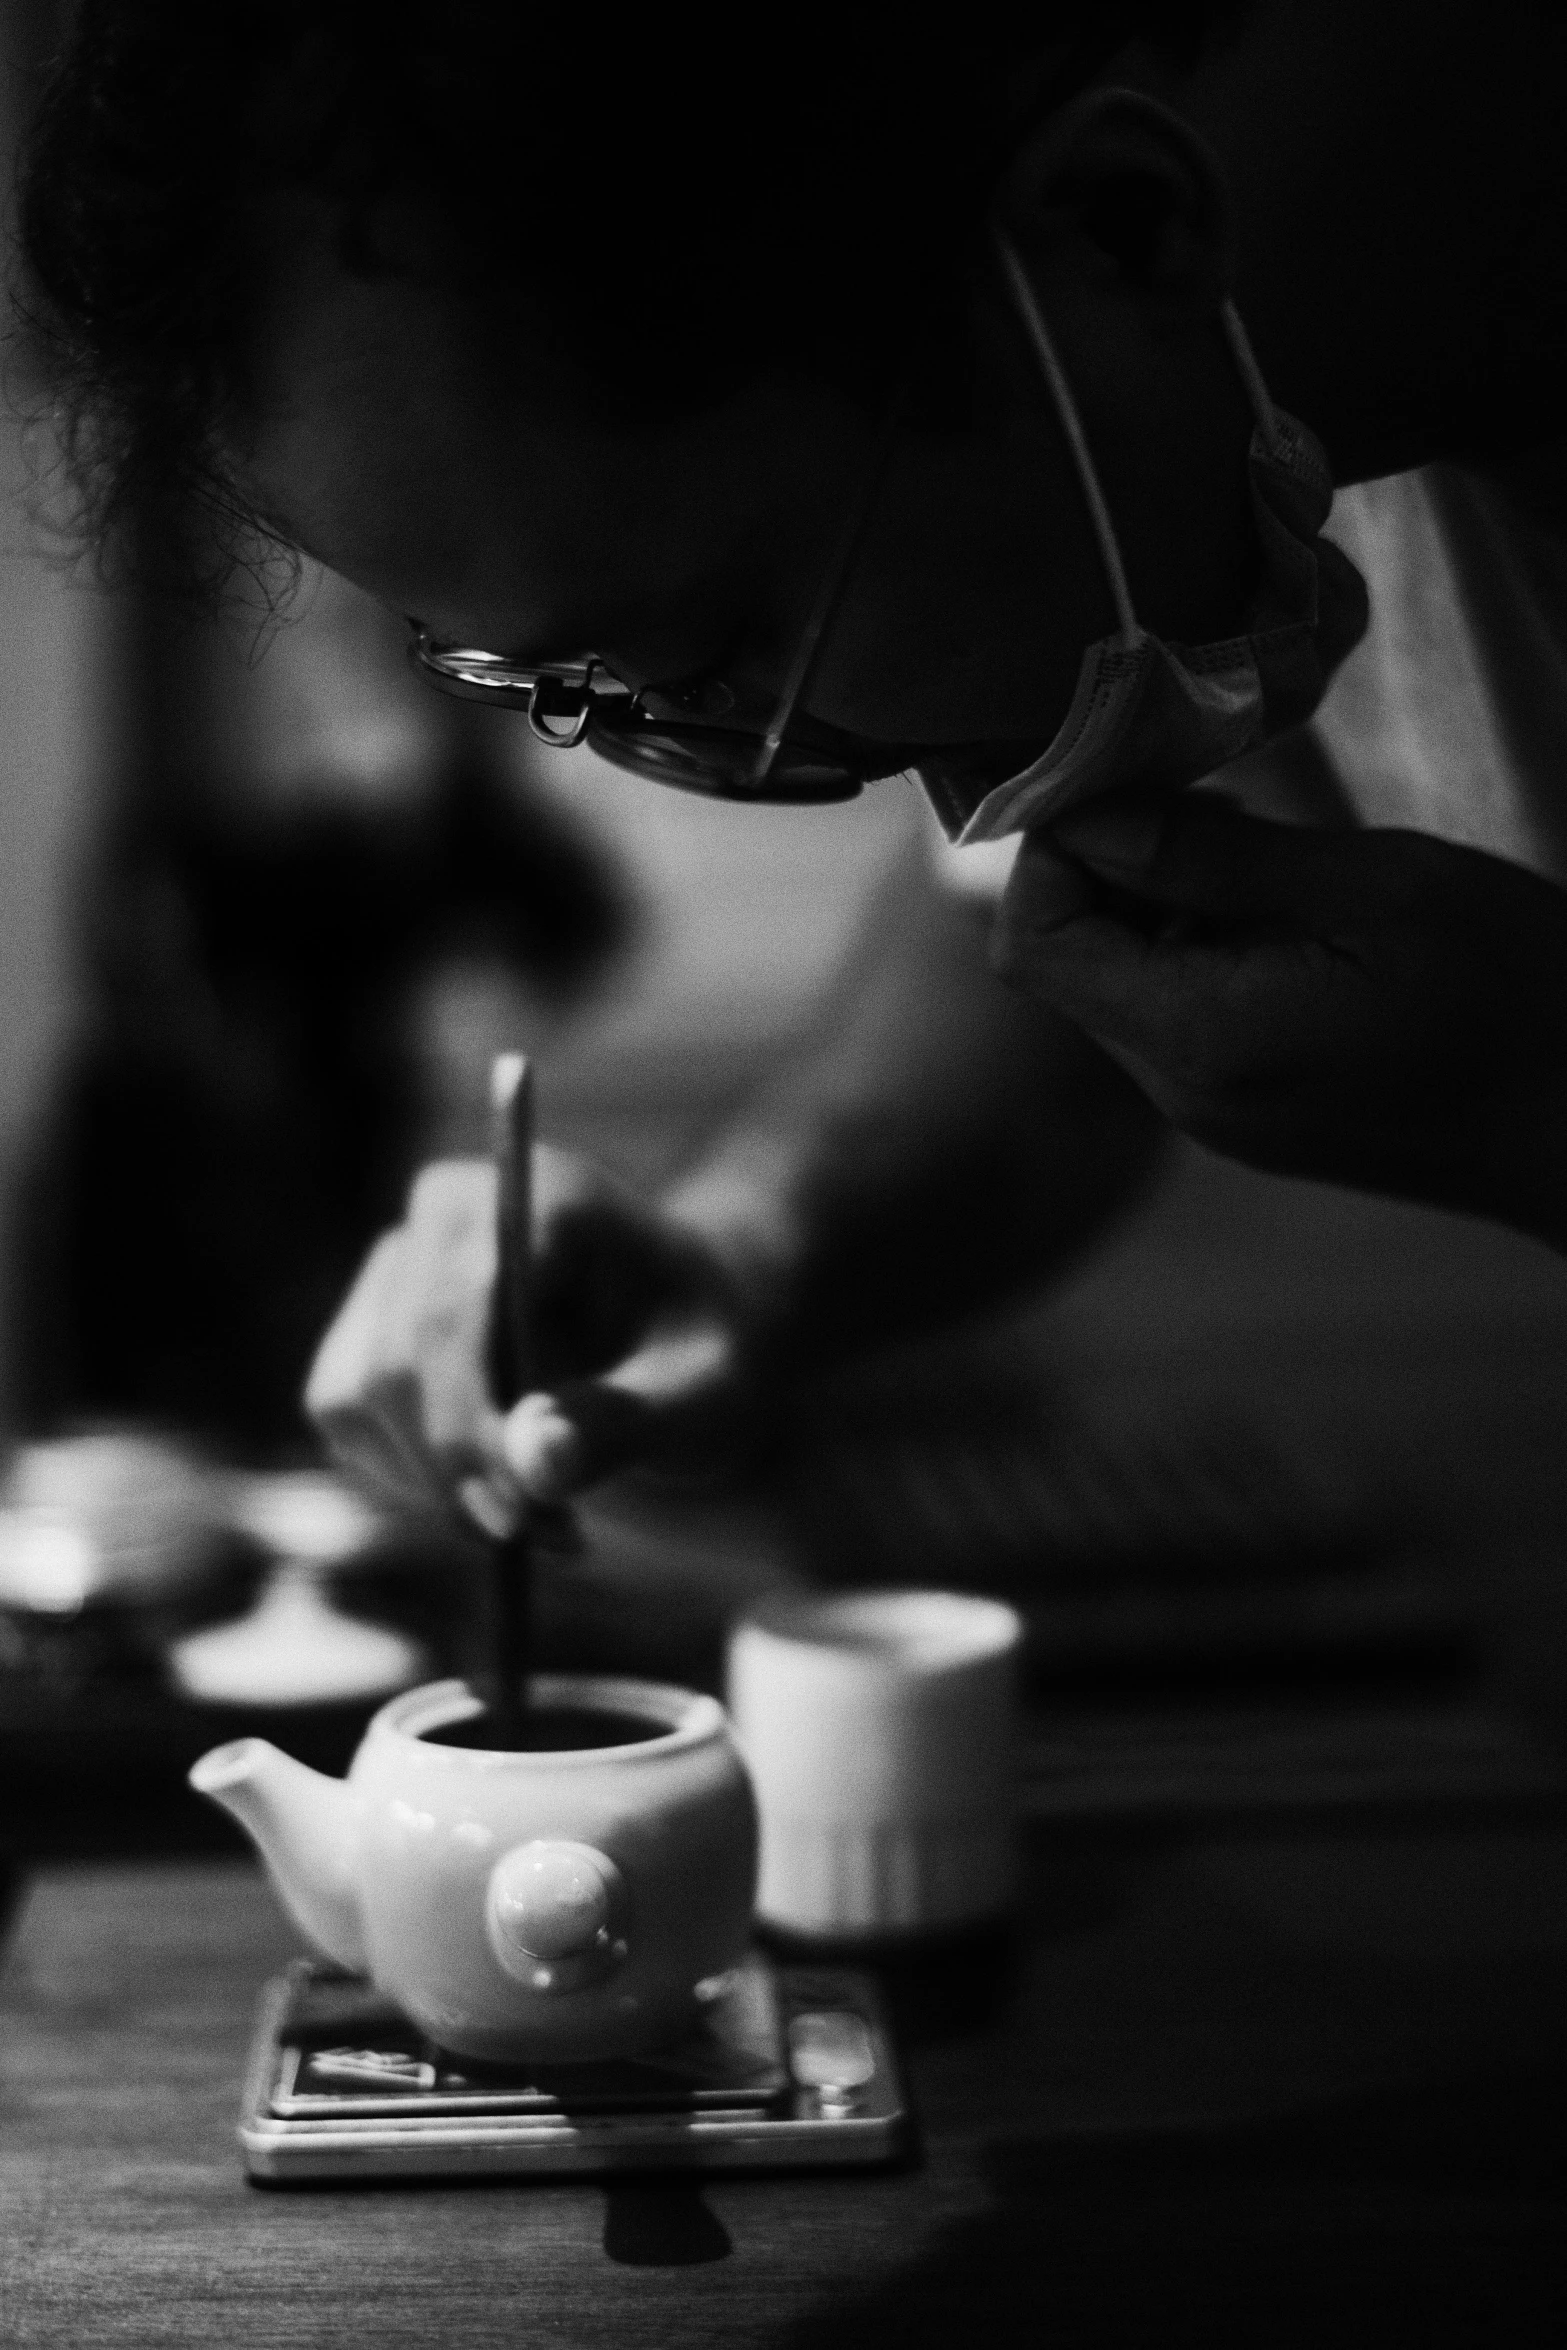 a person sitting at a table writing on a piece of paper, a black and white photo, pexels contest winner, process art, tea ceremony scene, teapot : 1, profile picture, porcelain organic